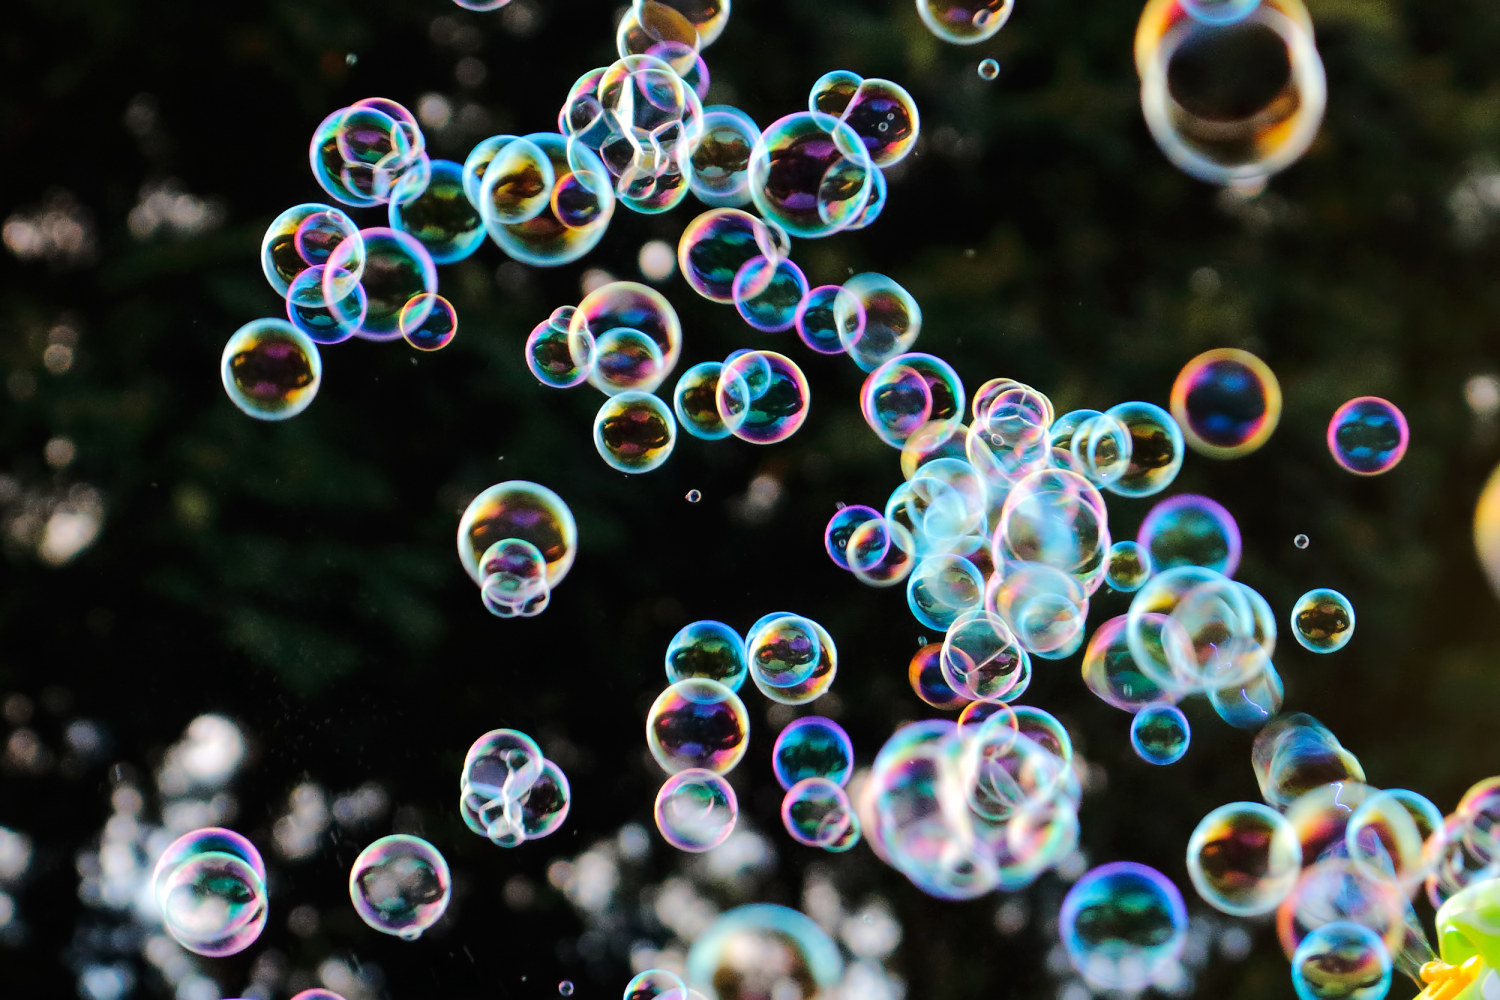 Scientists With Nothing Better to Do Created a Bubble That Lasted